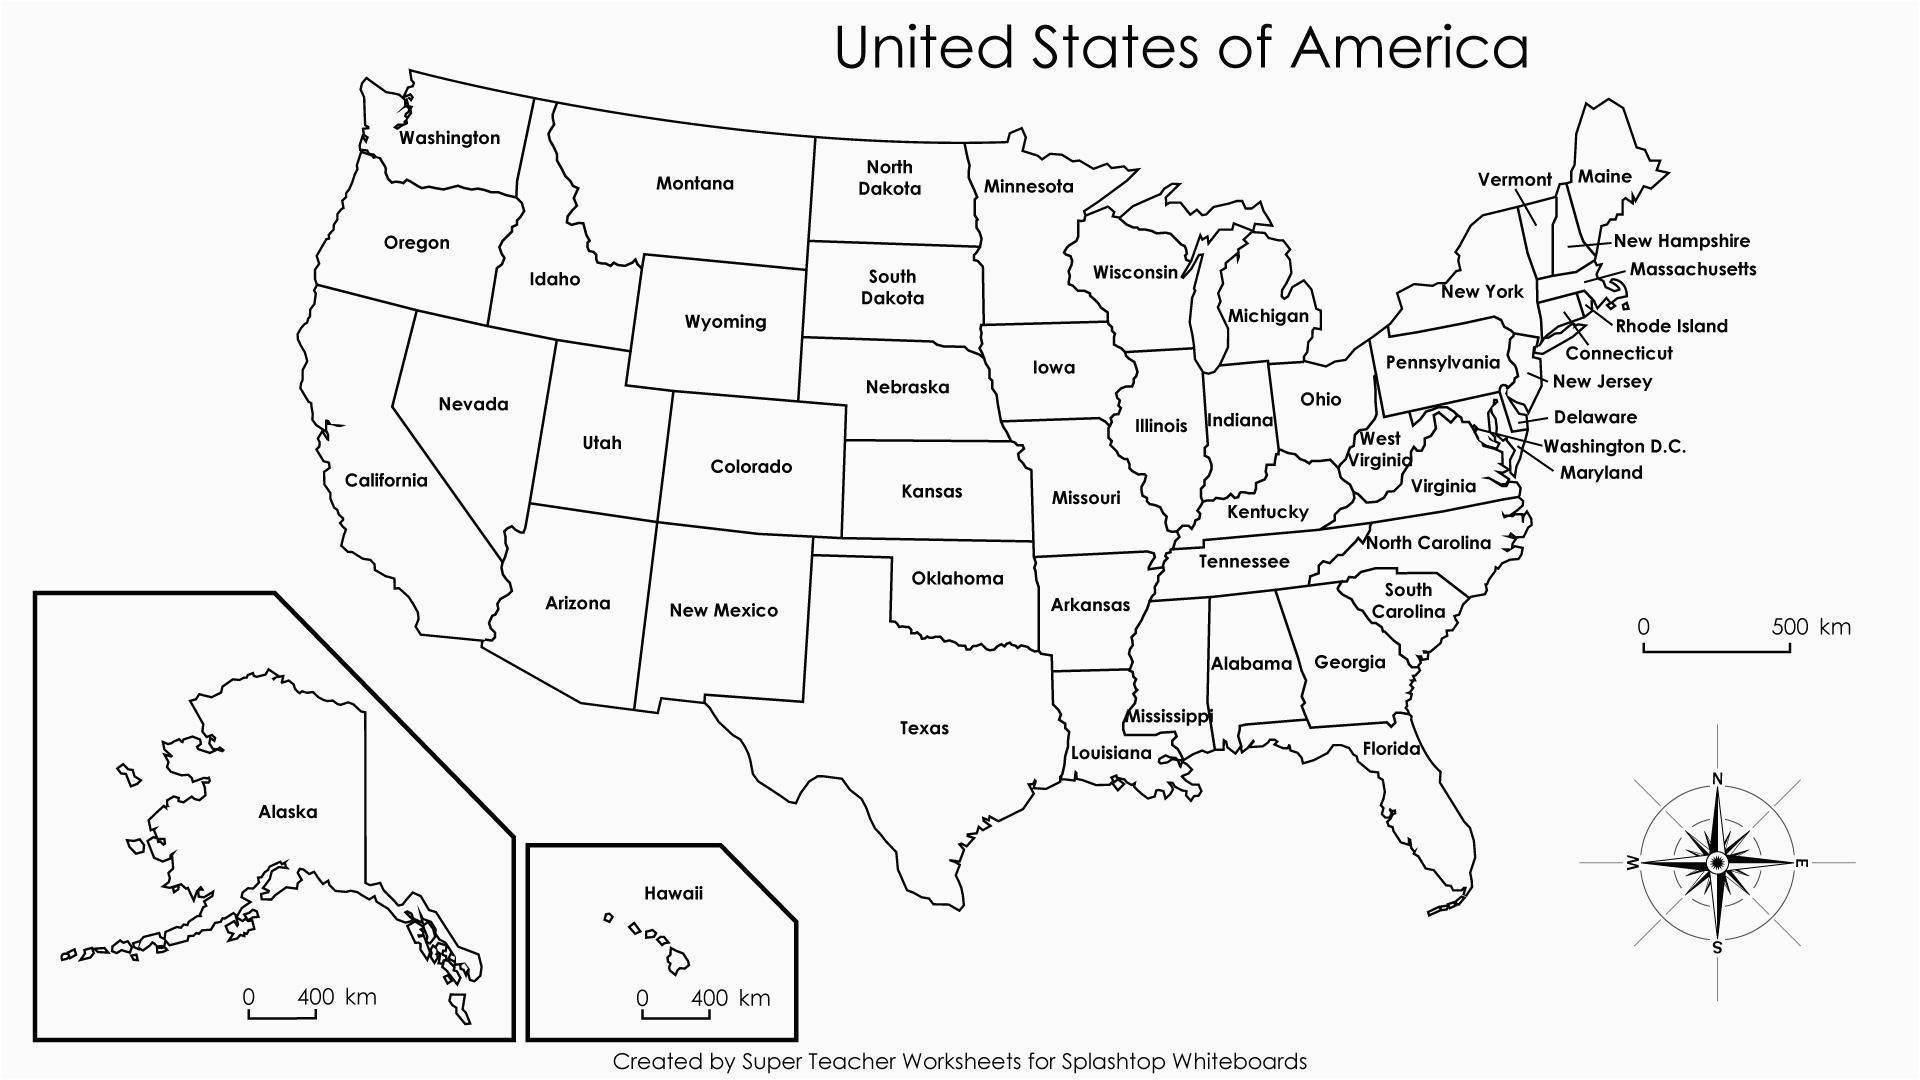 Ohio State Map Outline United States Map Outline with State Names Valid ...